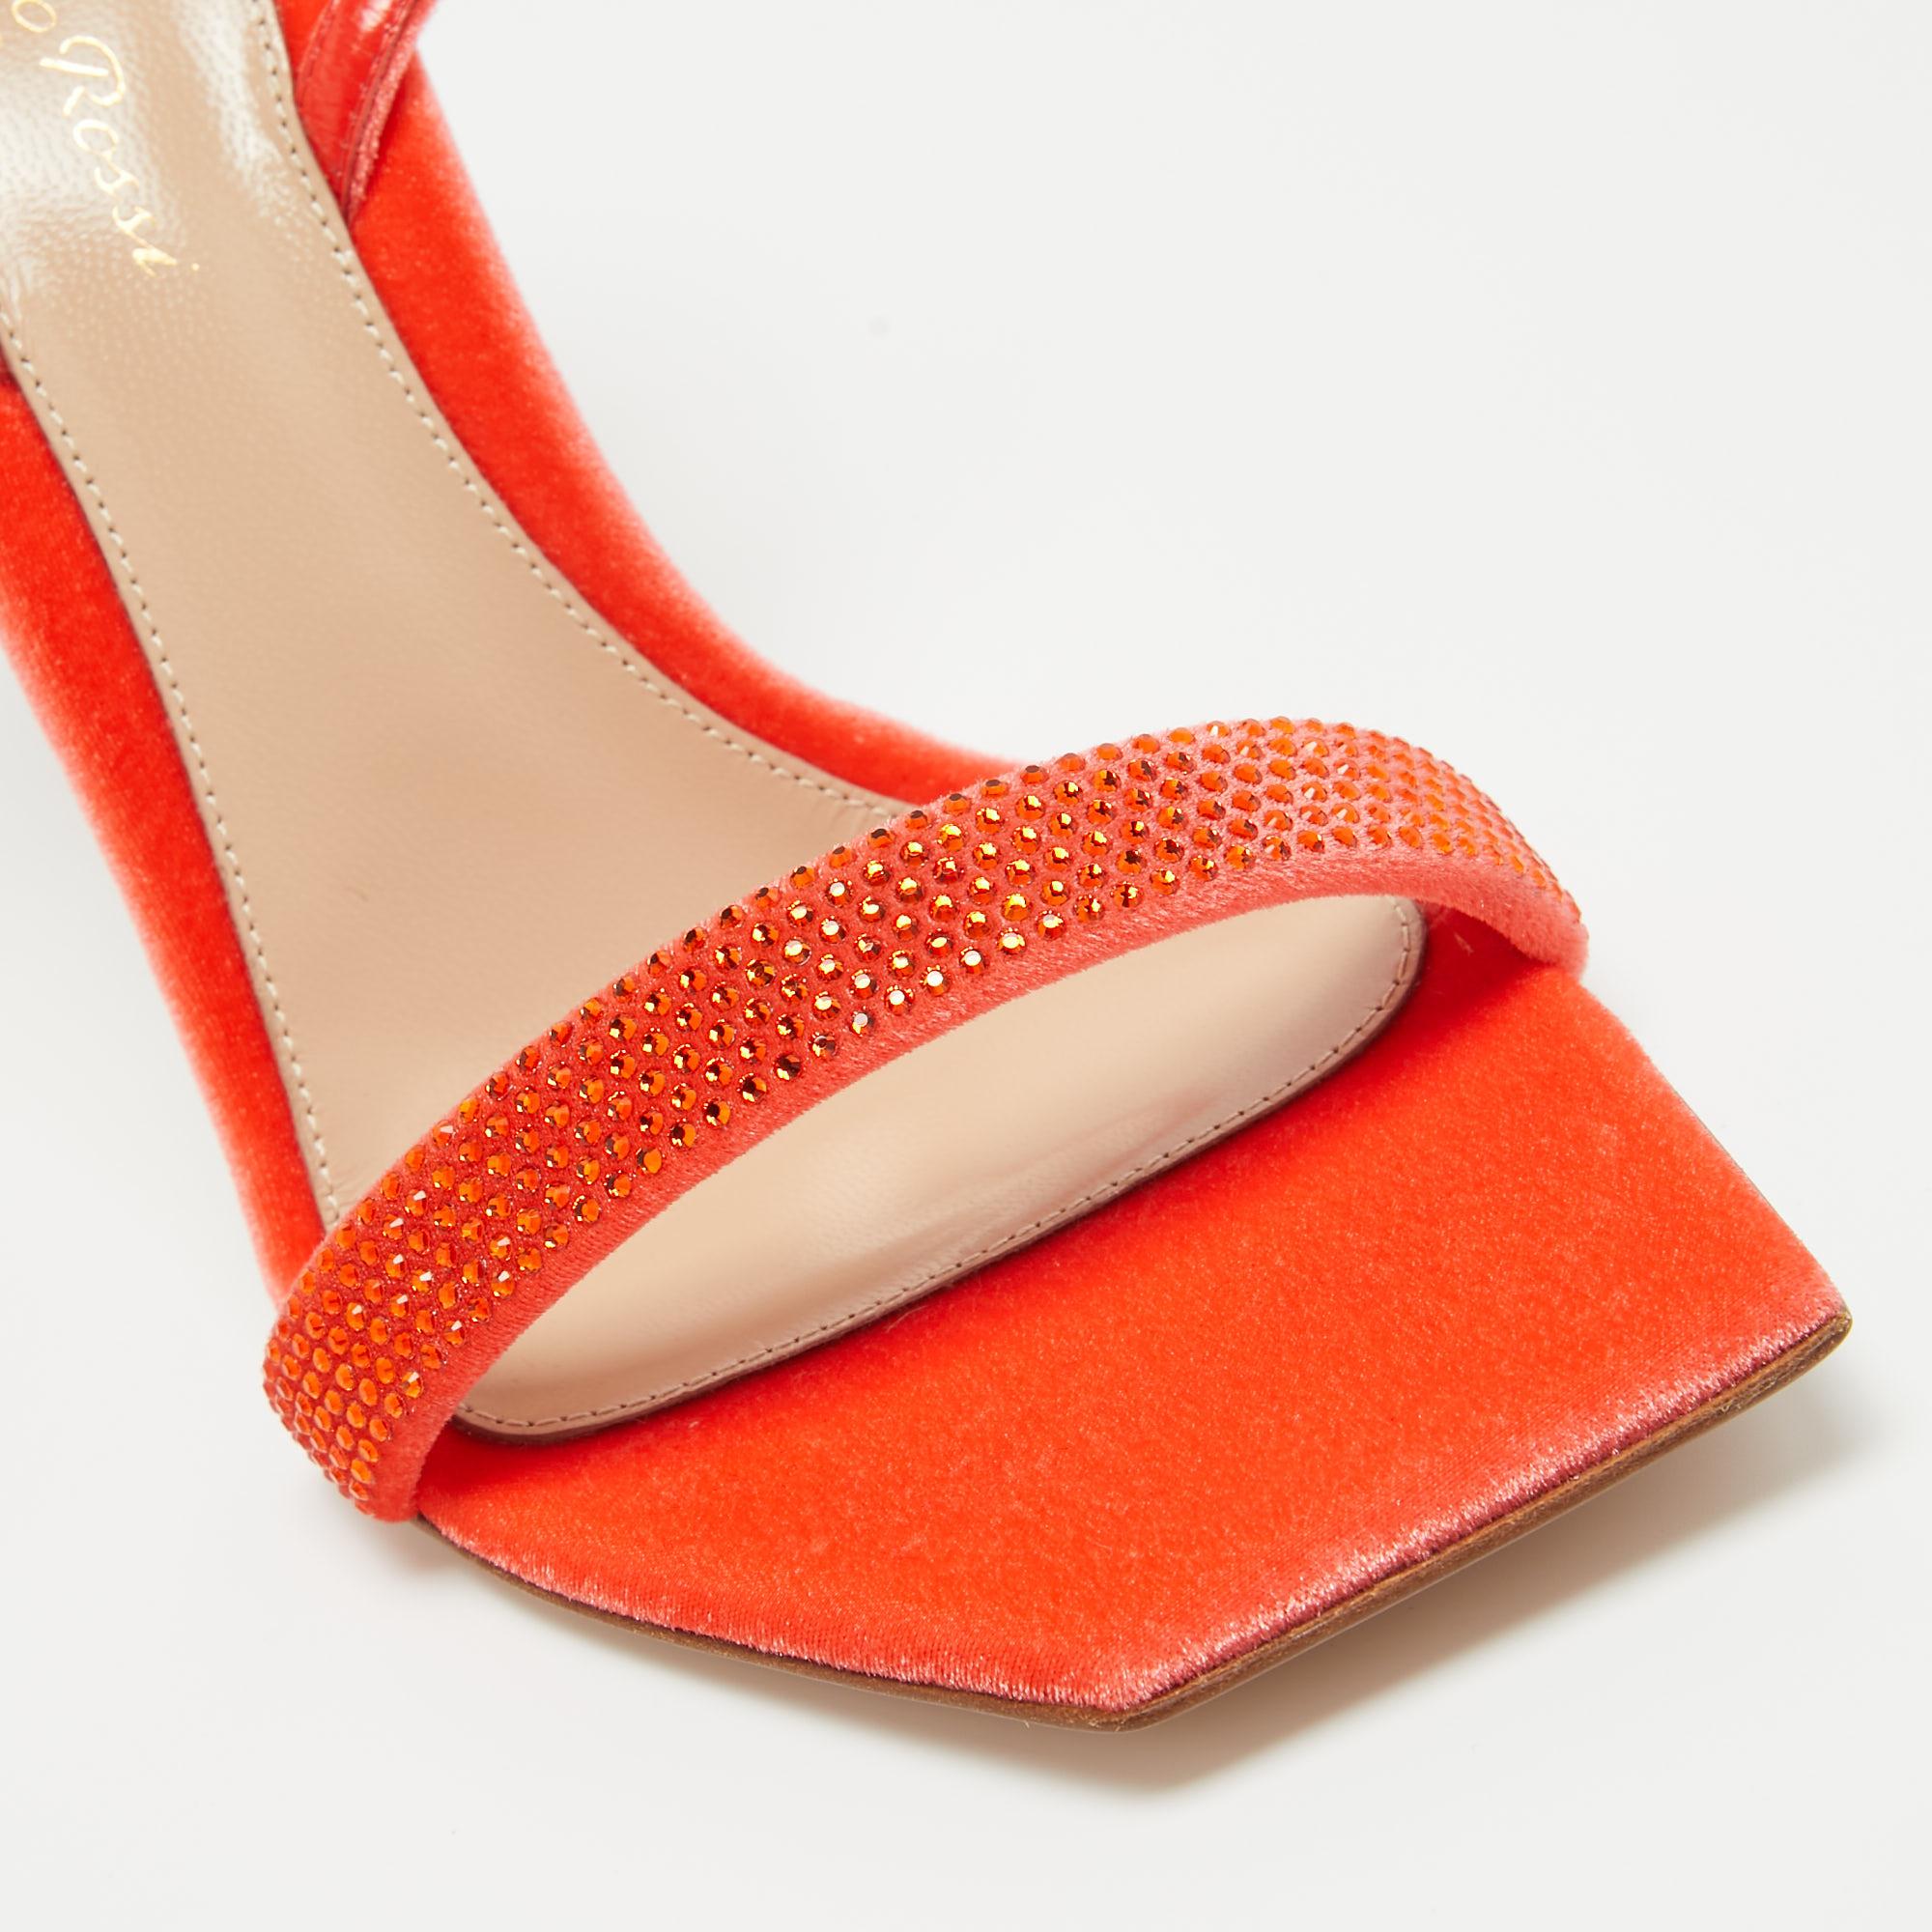 In poppy red leather, the Gianvito Rossi Sylvie sandals exude confident charm. Delicate straps gracefully embrace the foot, while a sturdy heel provides stability and style. With impeccable craftsmanship and timeless design, these sandals